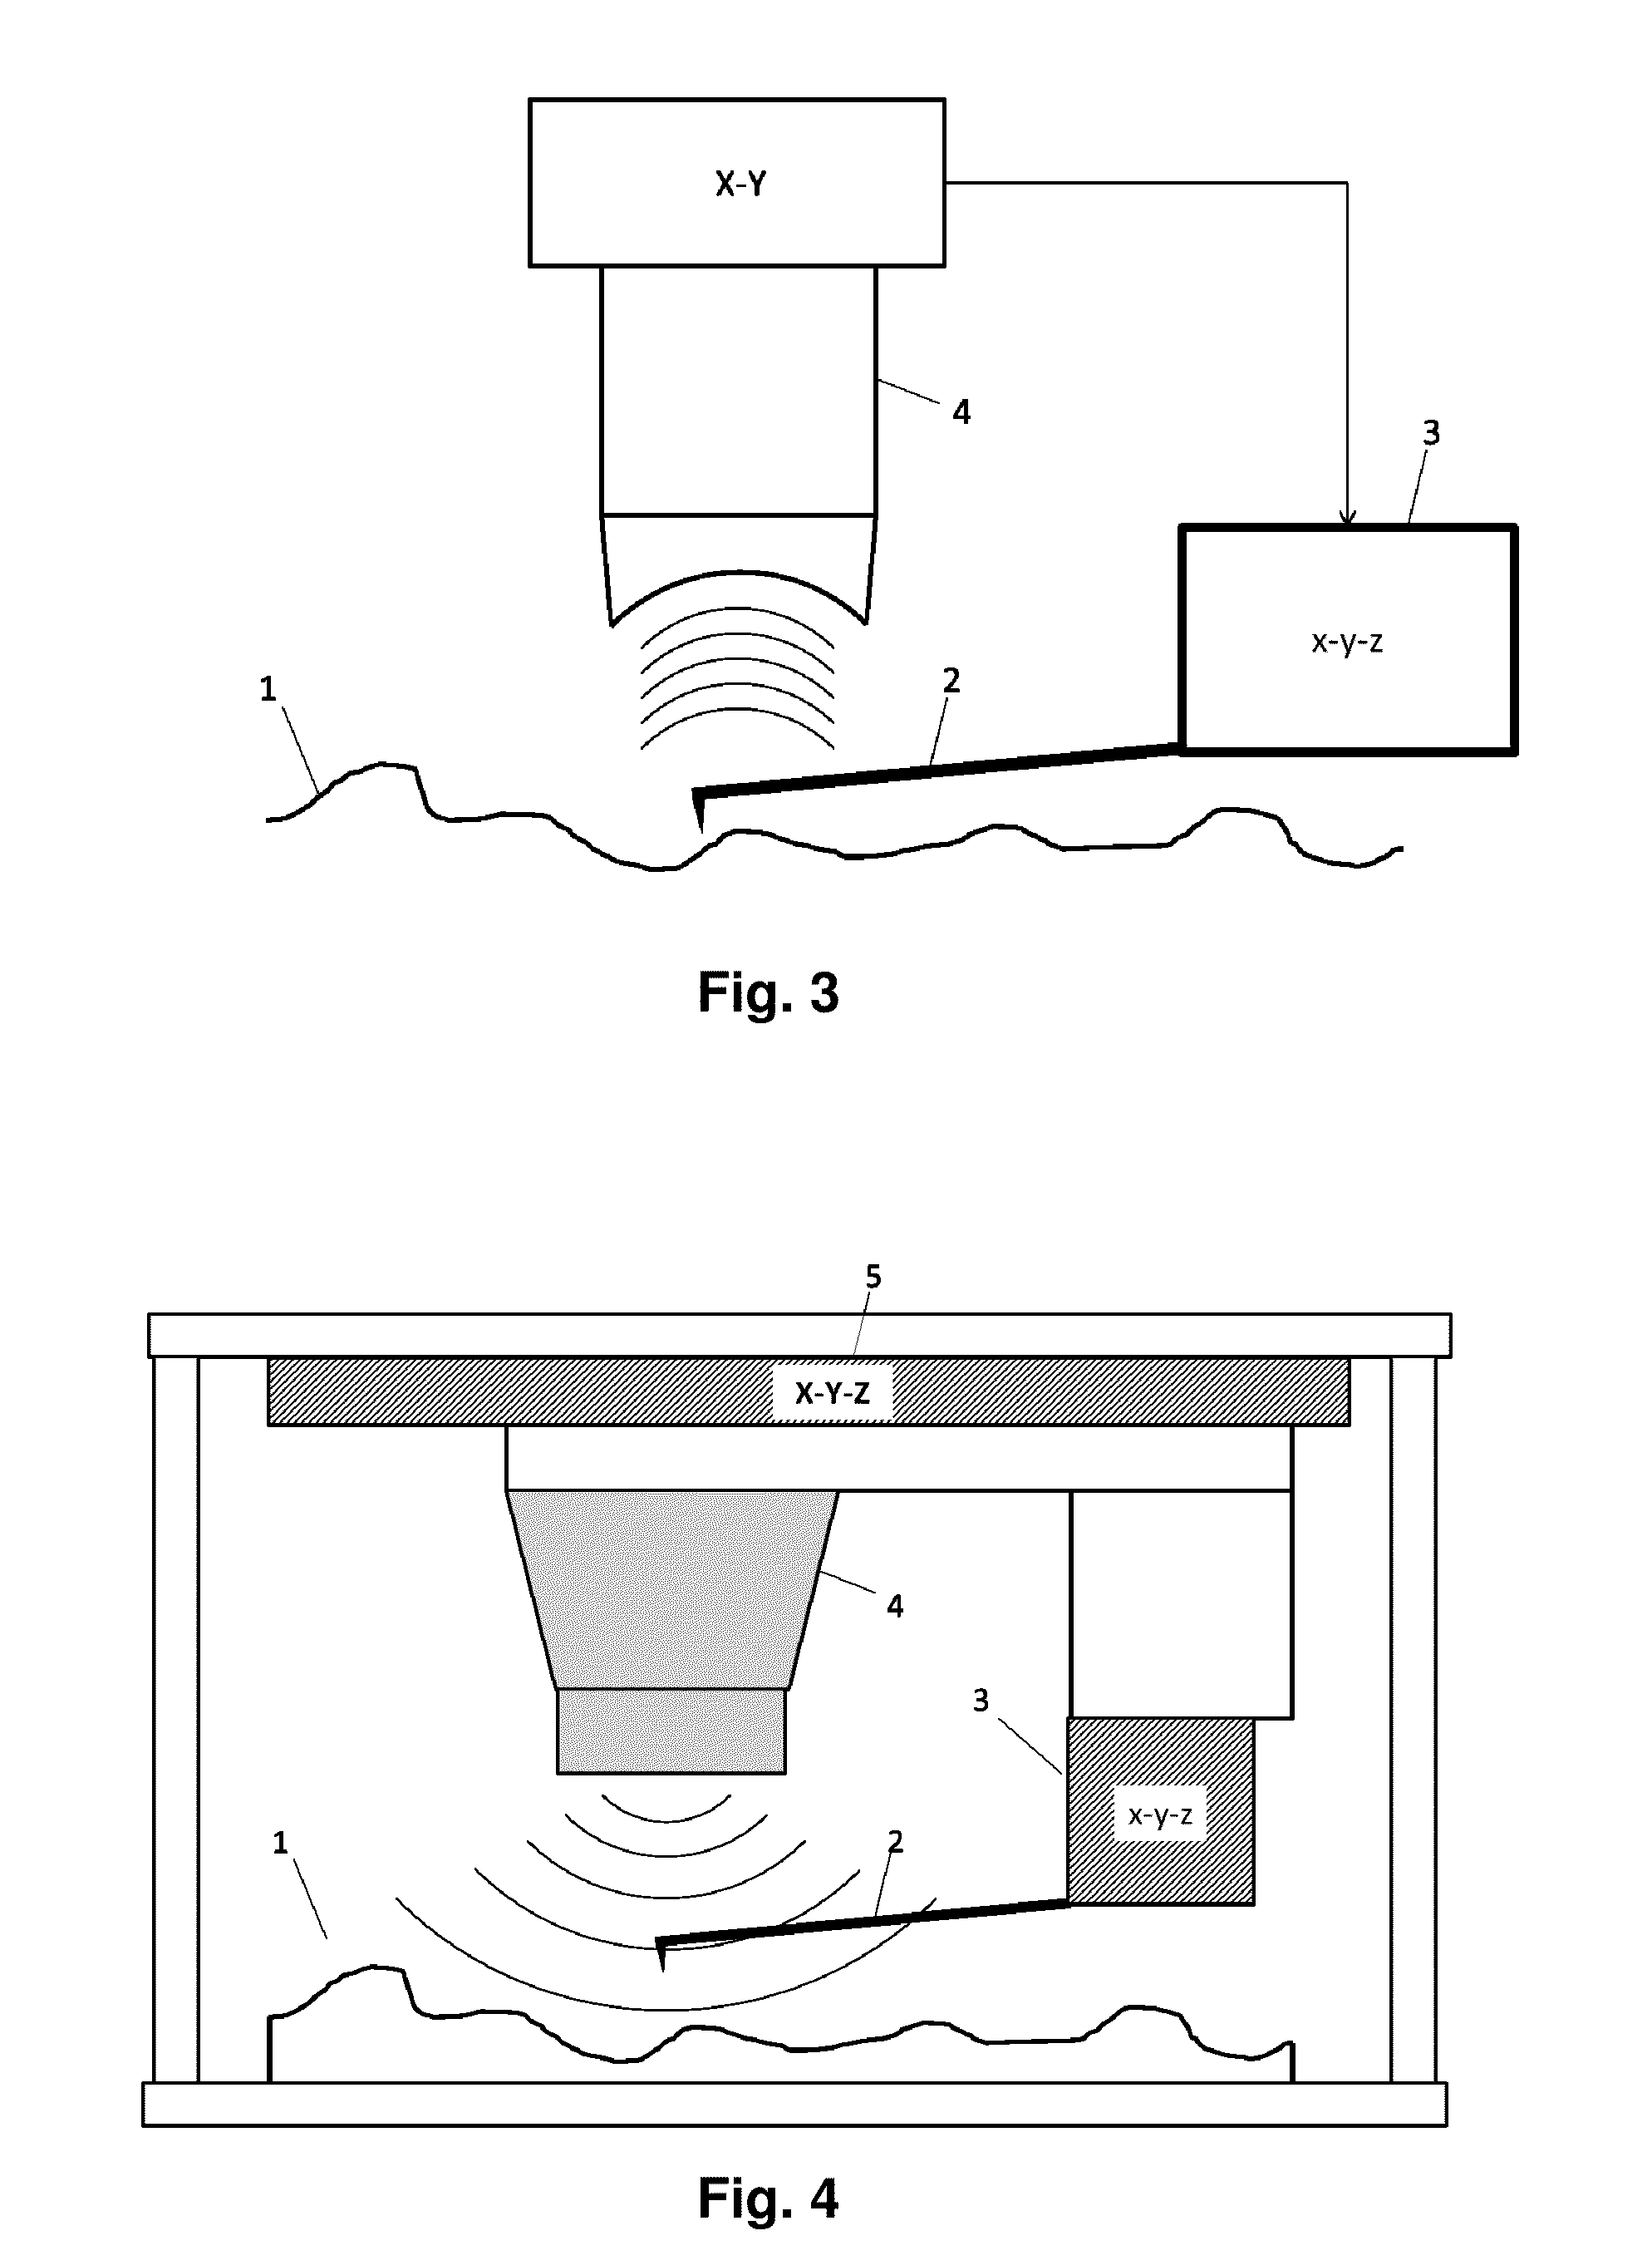 Method and apparatus for automated scanning probe microscopy